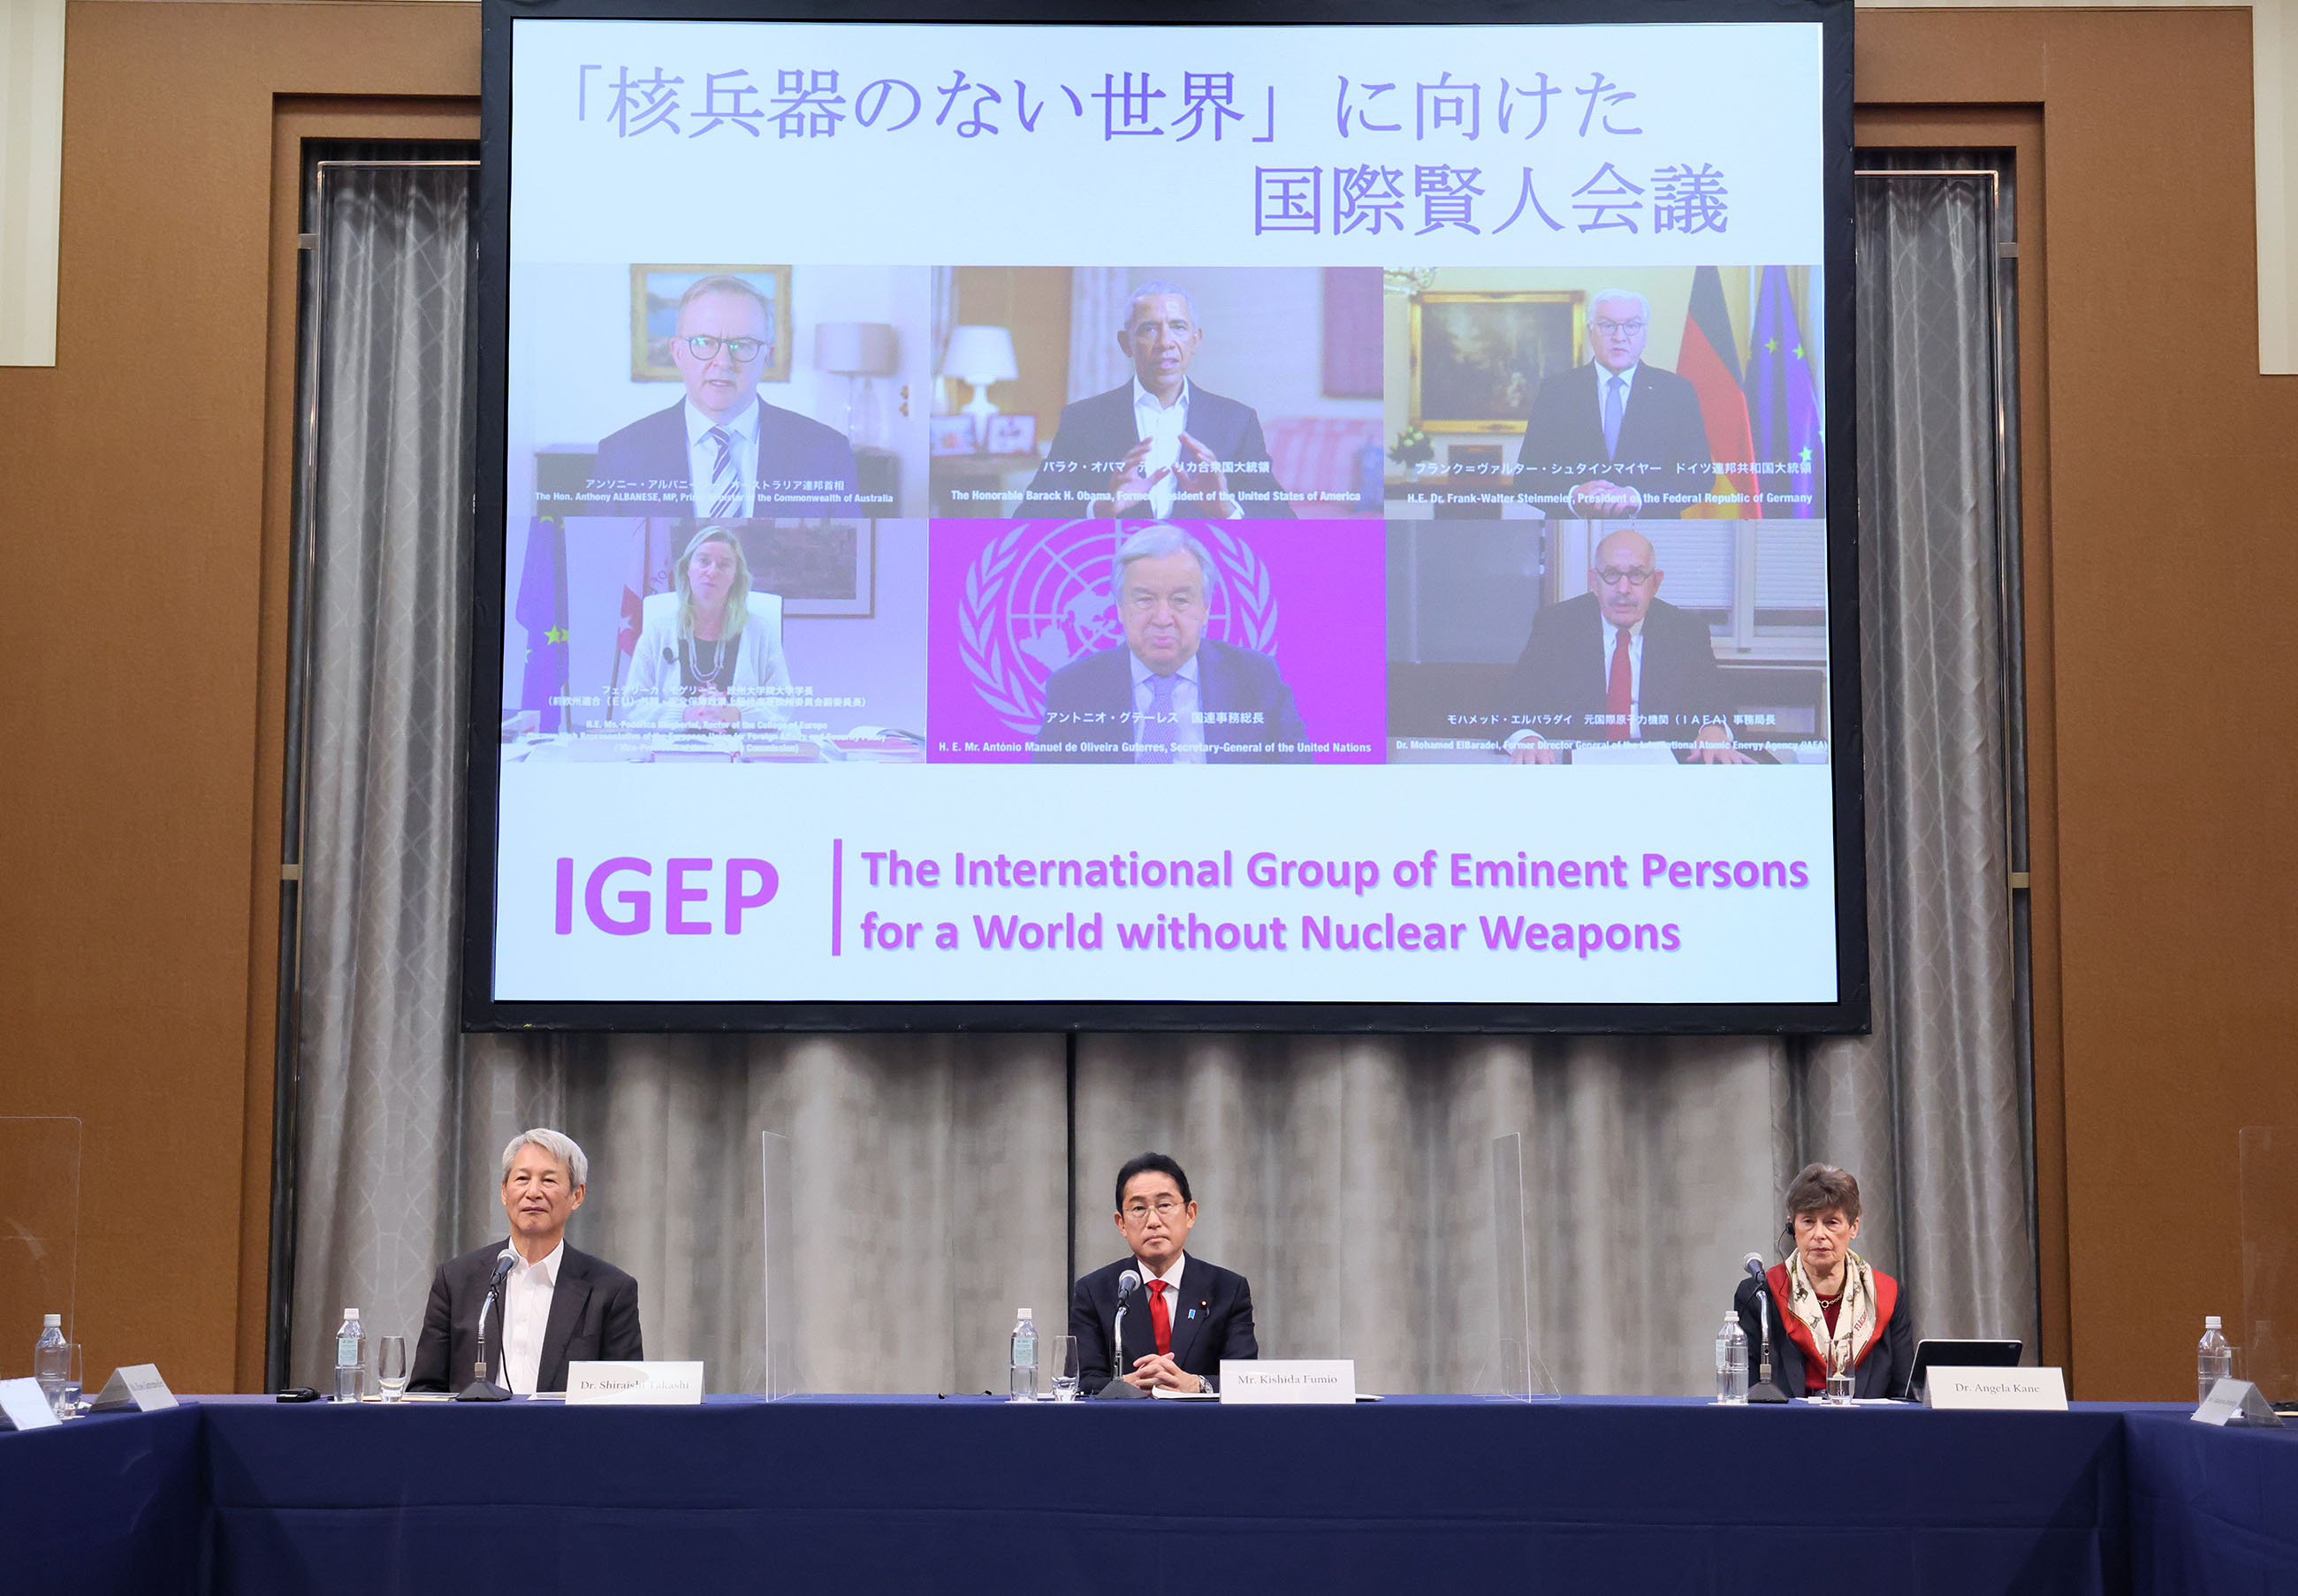 International Group of Eminent Persons for a World without Nuclear Weapons (IGEP)